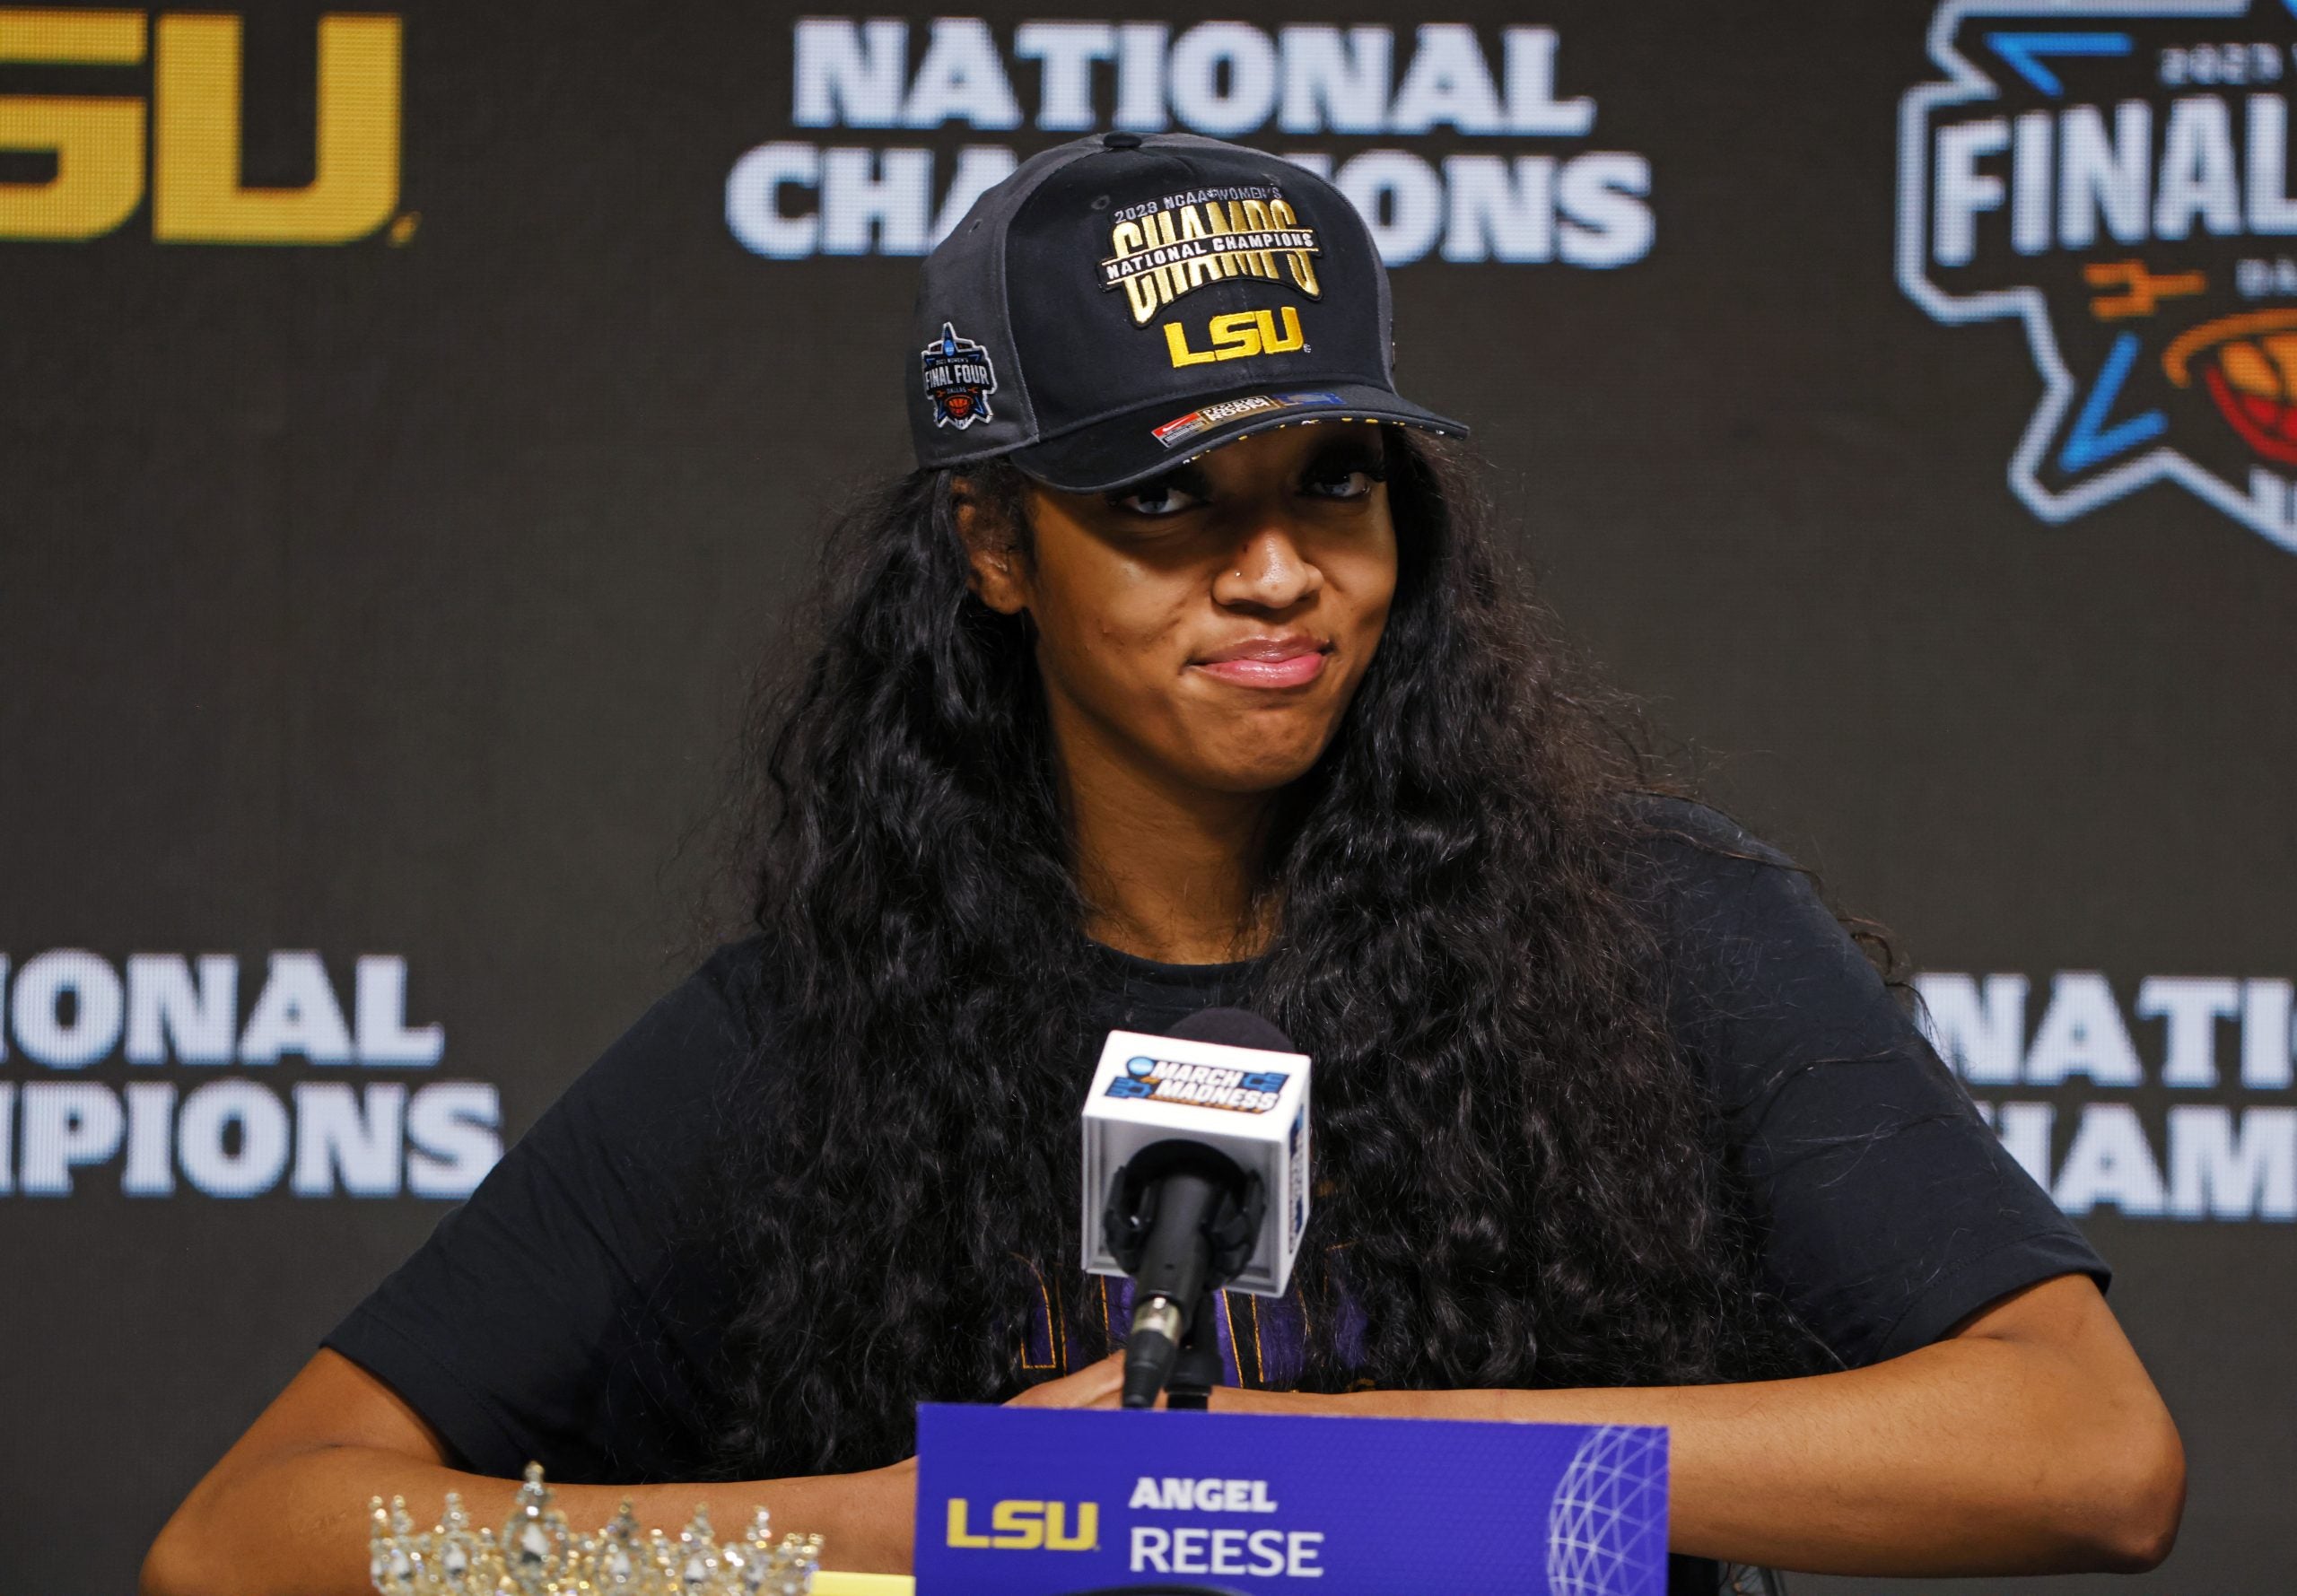 College Basketball Star Angel Reese Said She's 'Making More Than Some Of The People That Are In The League'